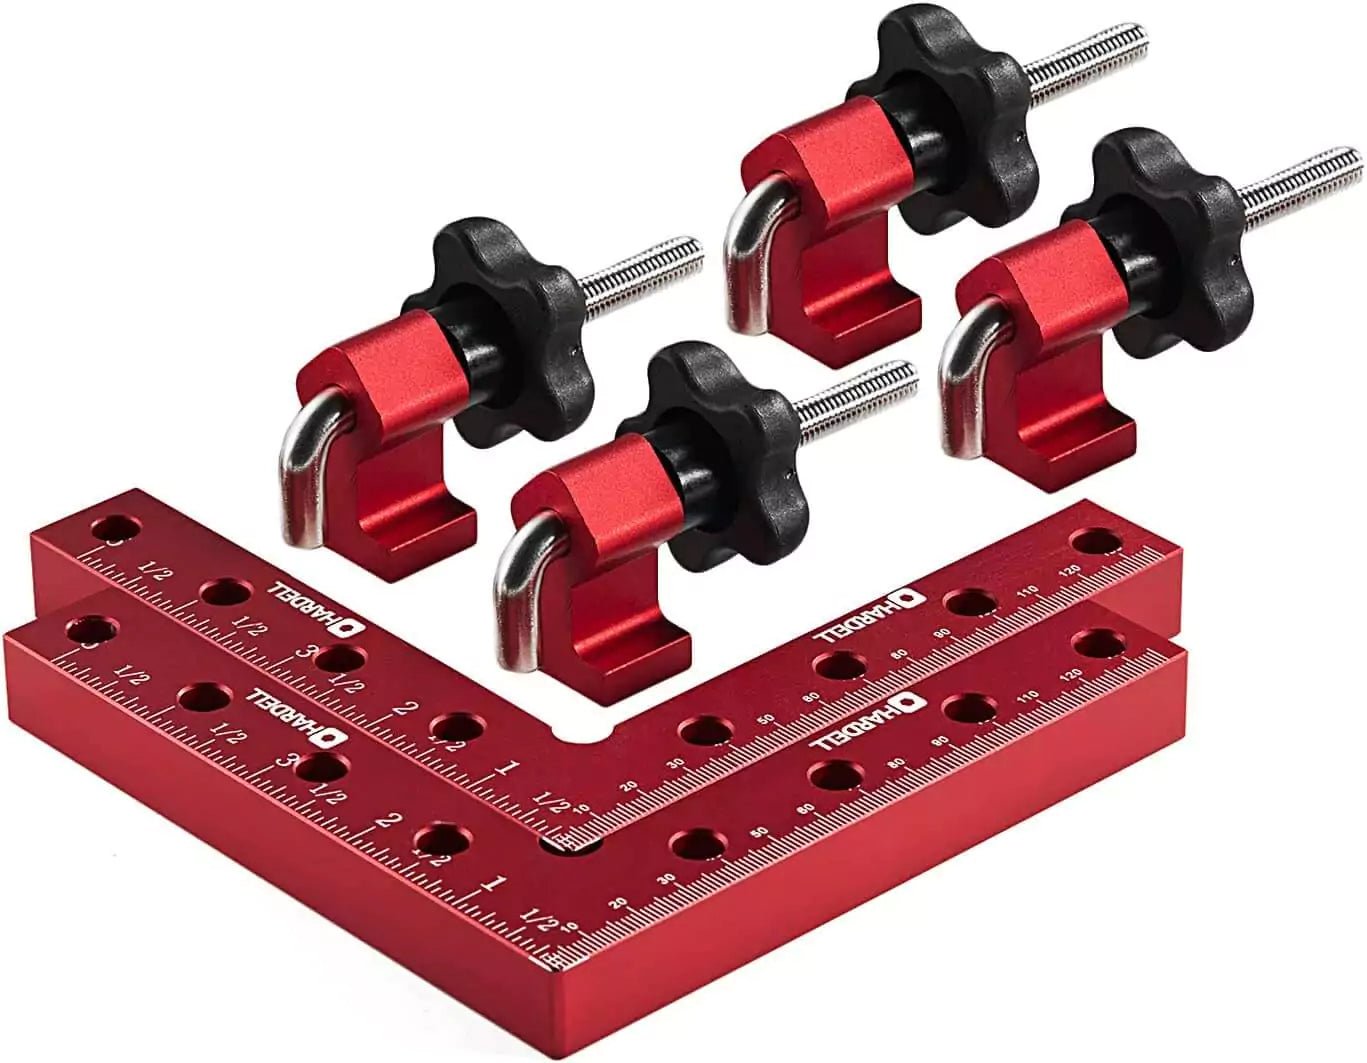 HARDELL HDRA0101 90 Degree Positioning Squares Right Angle Clamps - Hardell